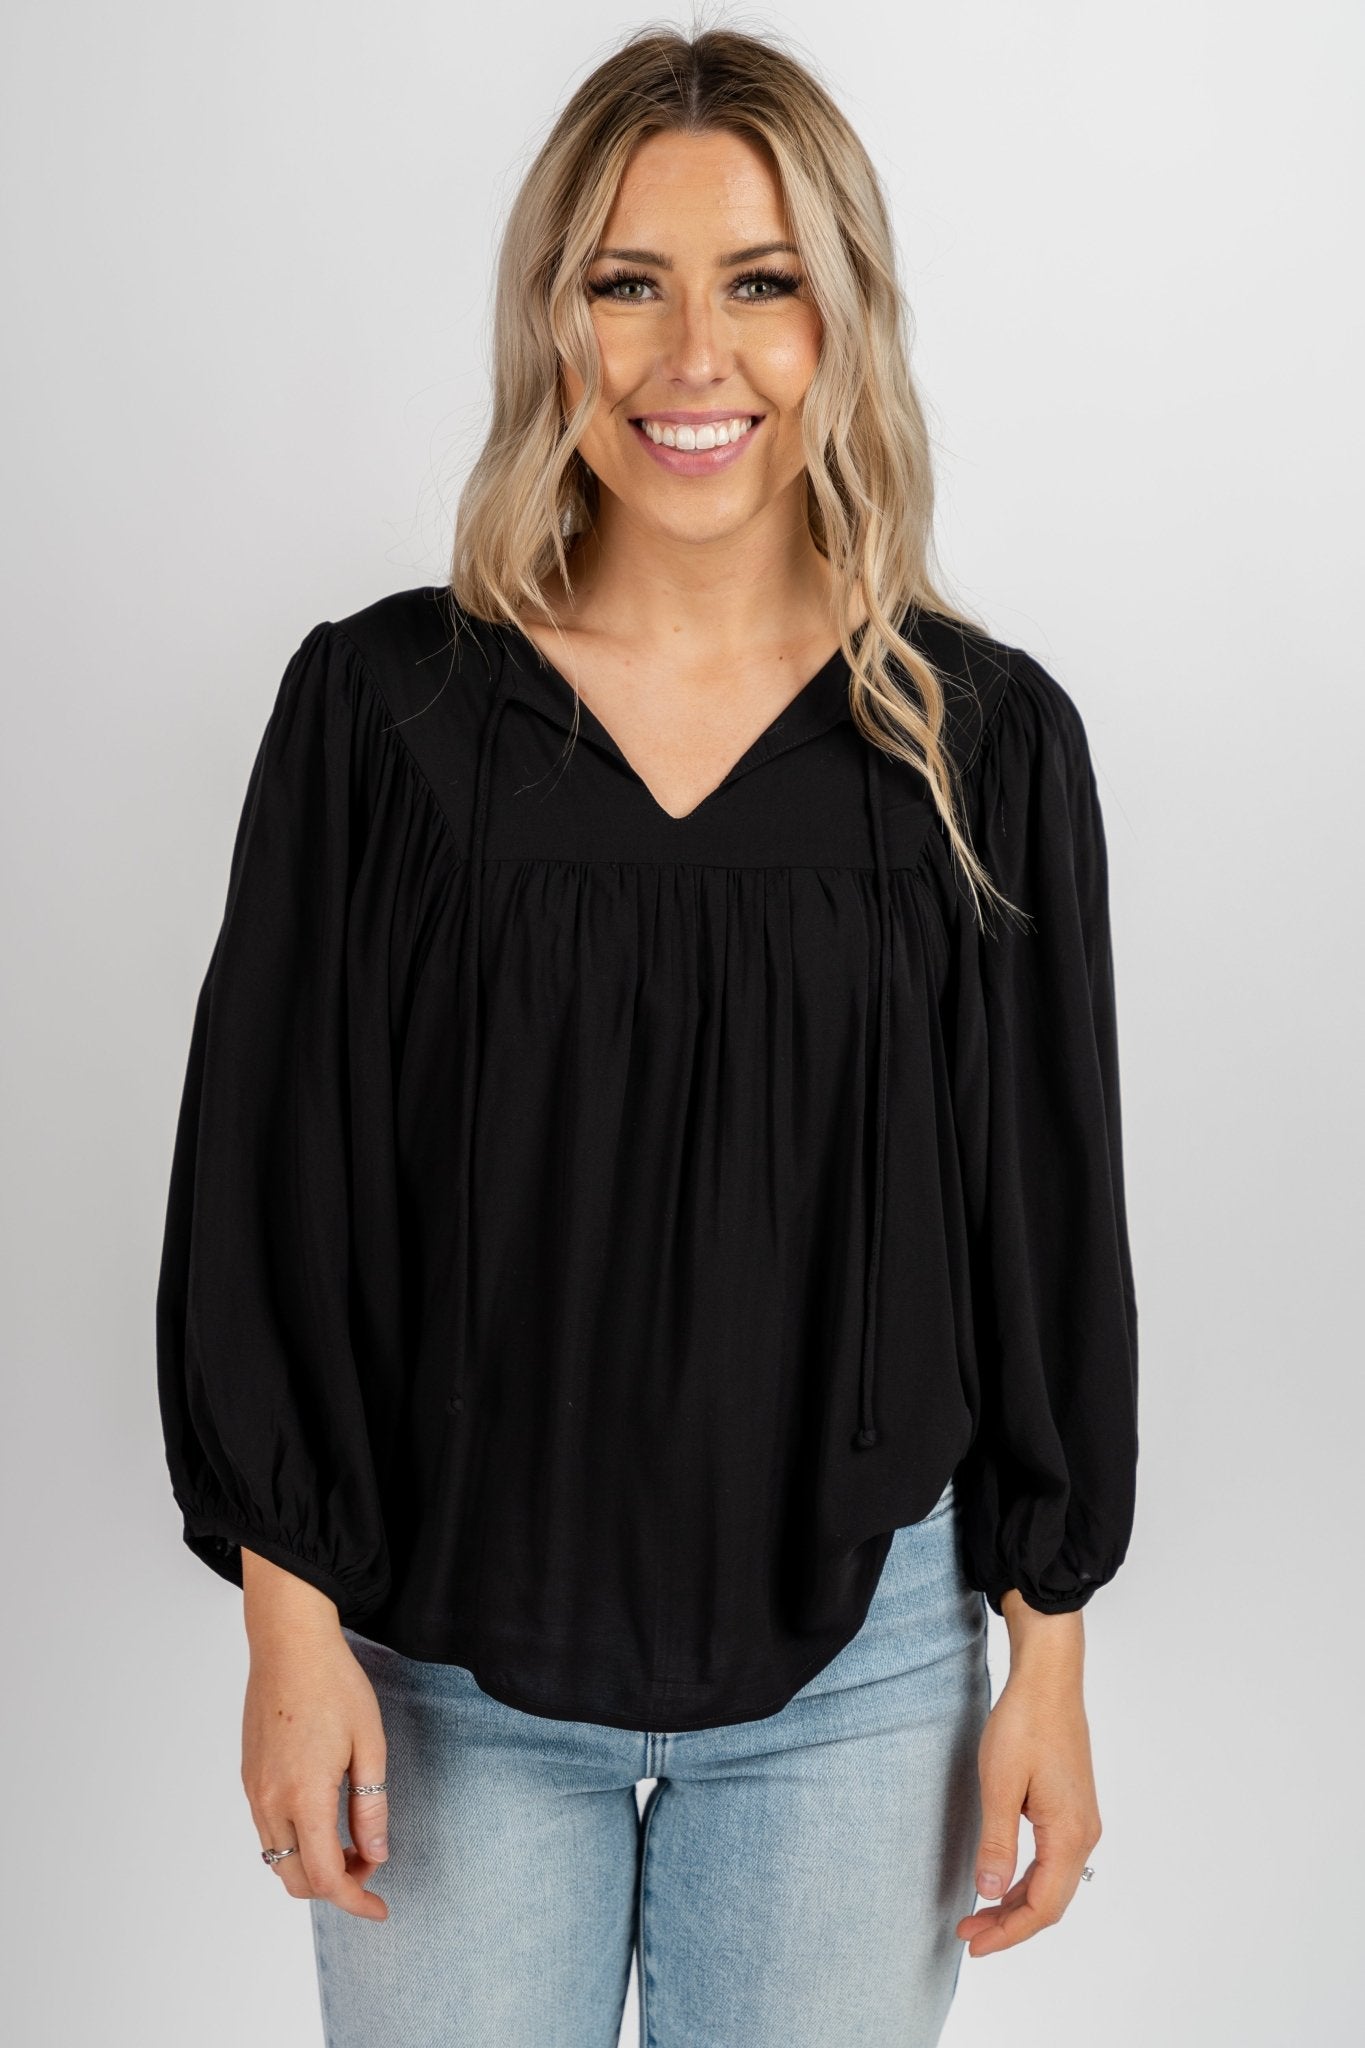 Z Supply Eden top black - Z Supply Top - Z Supply Apparel at Lush Fashion Lounge Trendy Boutique Oklahoma City